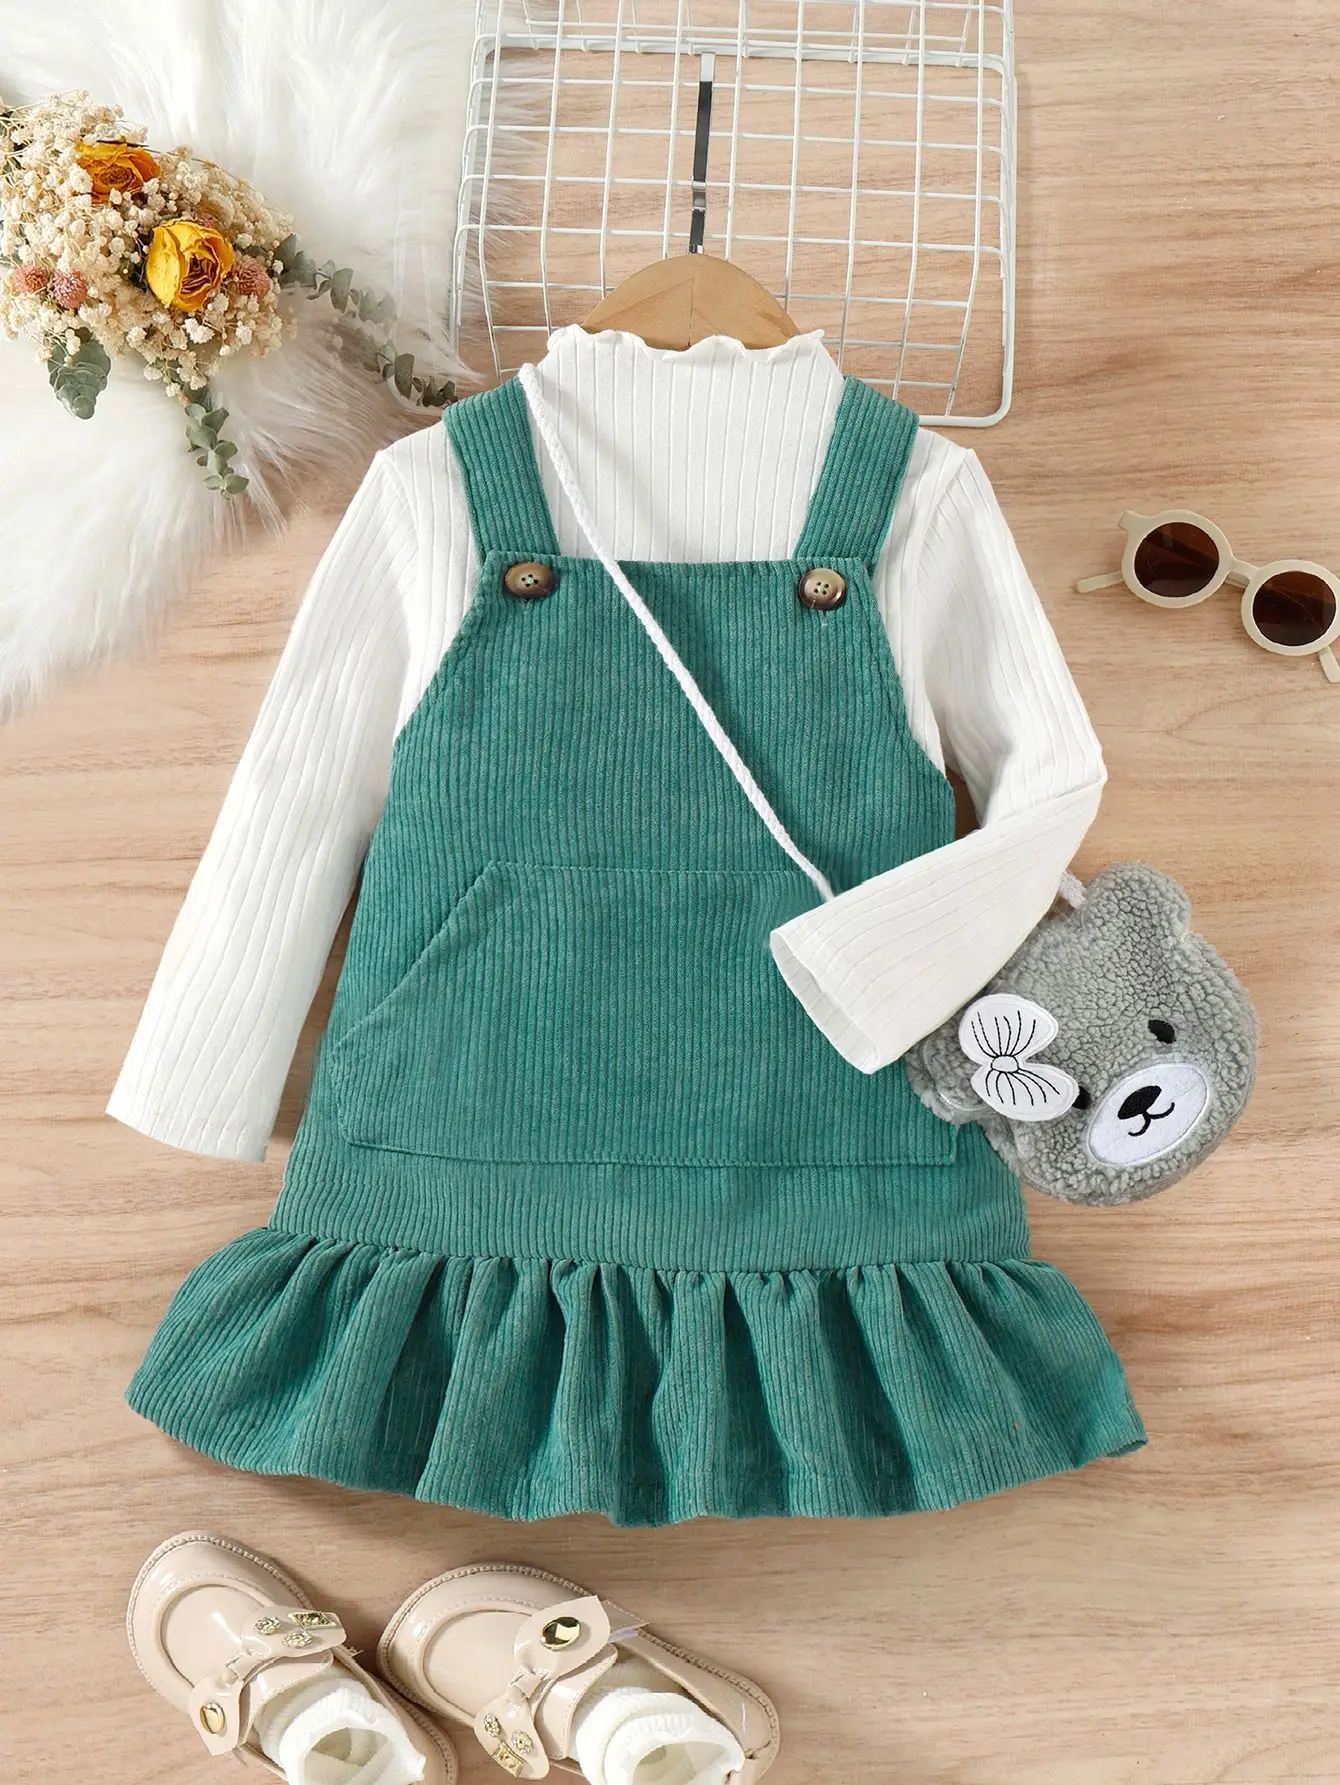 New arrival kids clothes toddler girls long-sleeve shirt+corduroy skirts+bags 3pcs boutique casual dresses suits for girls